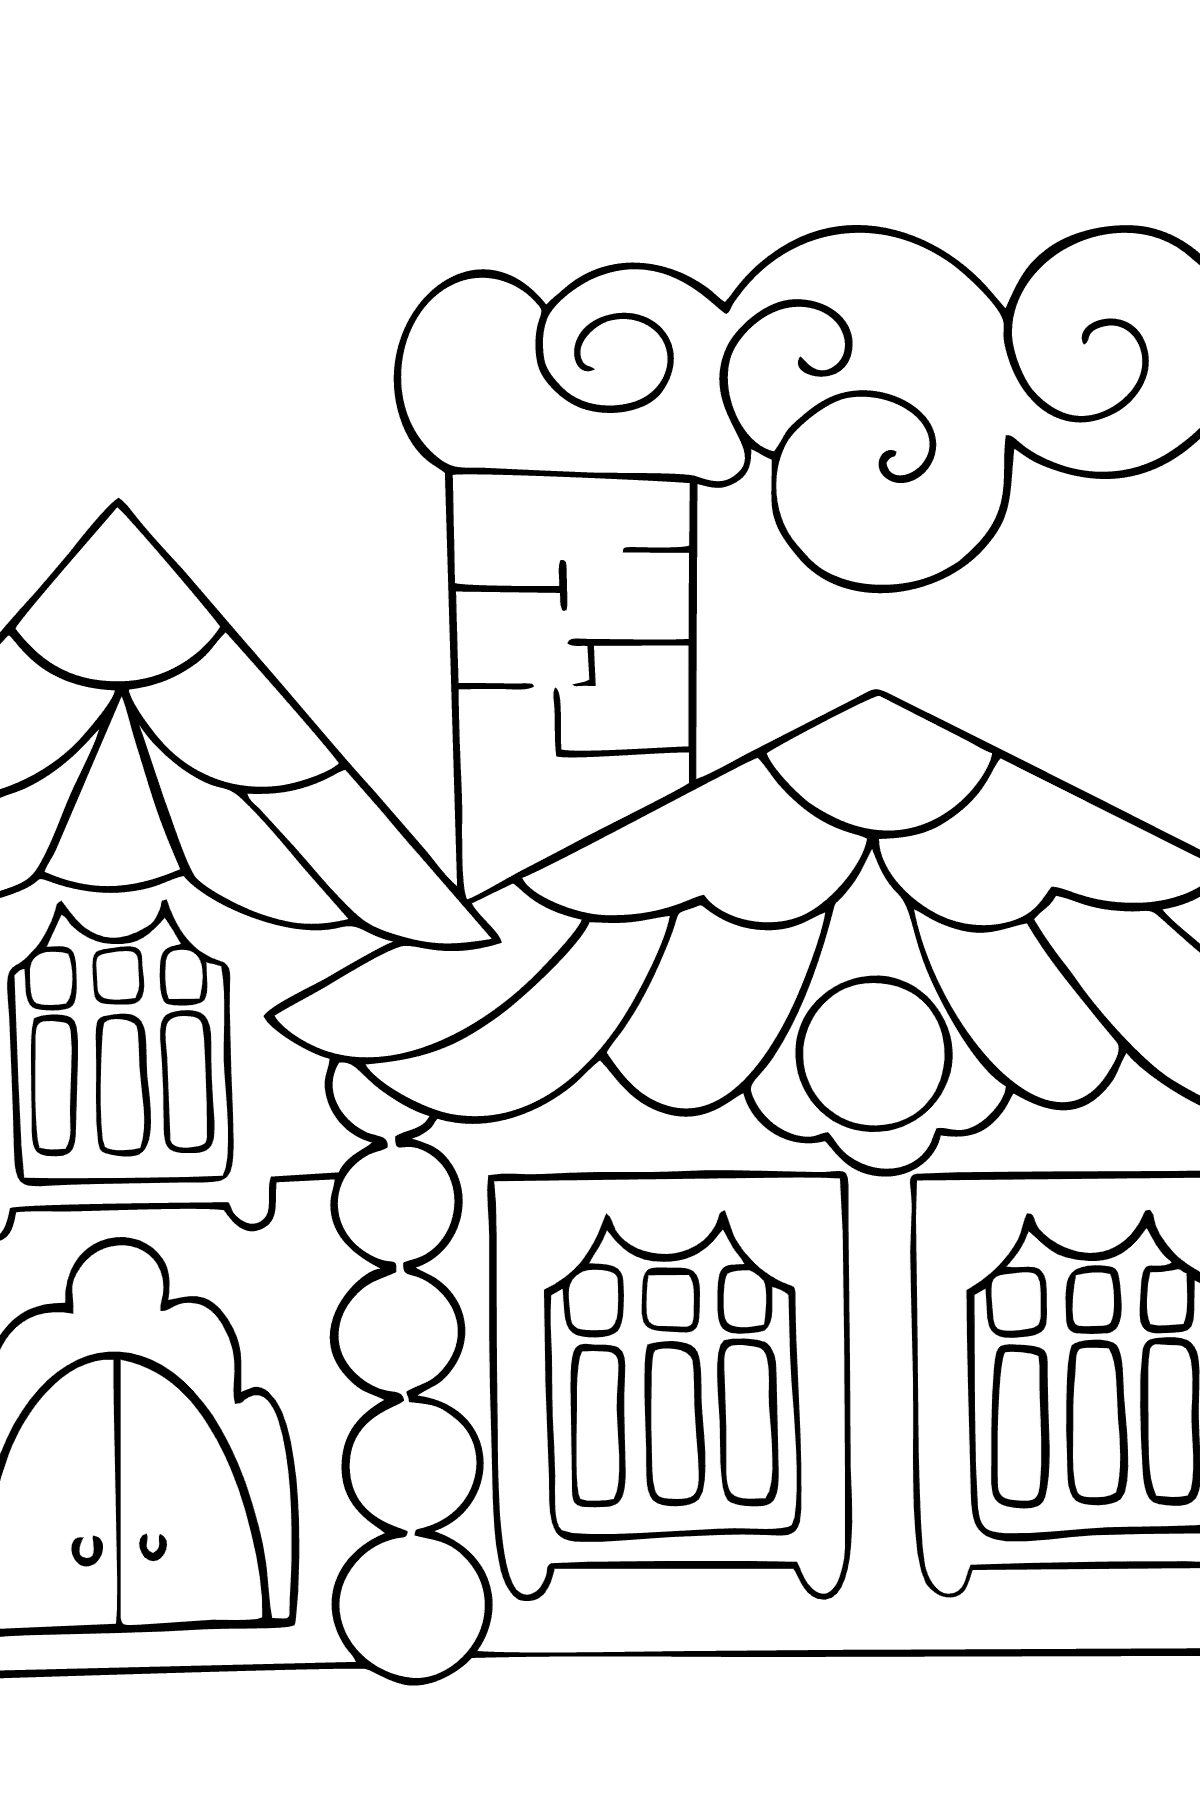 House in the Forest Coloring Page (Easy) - Coloring Pages for Kids